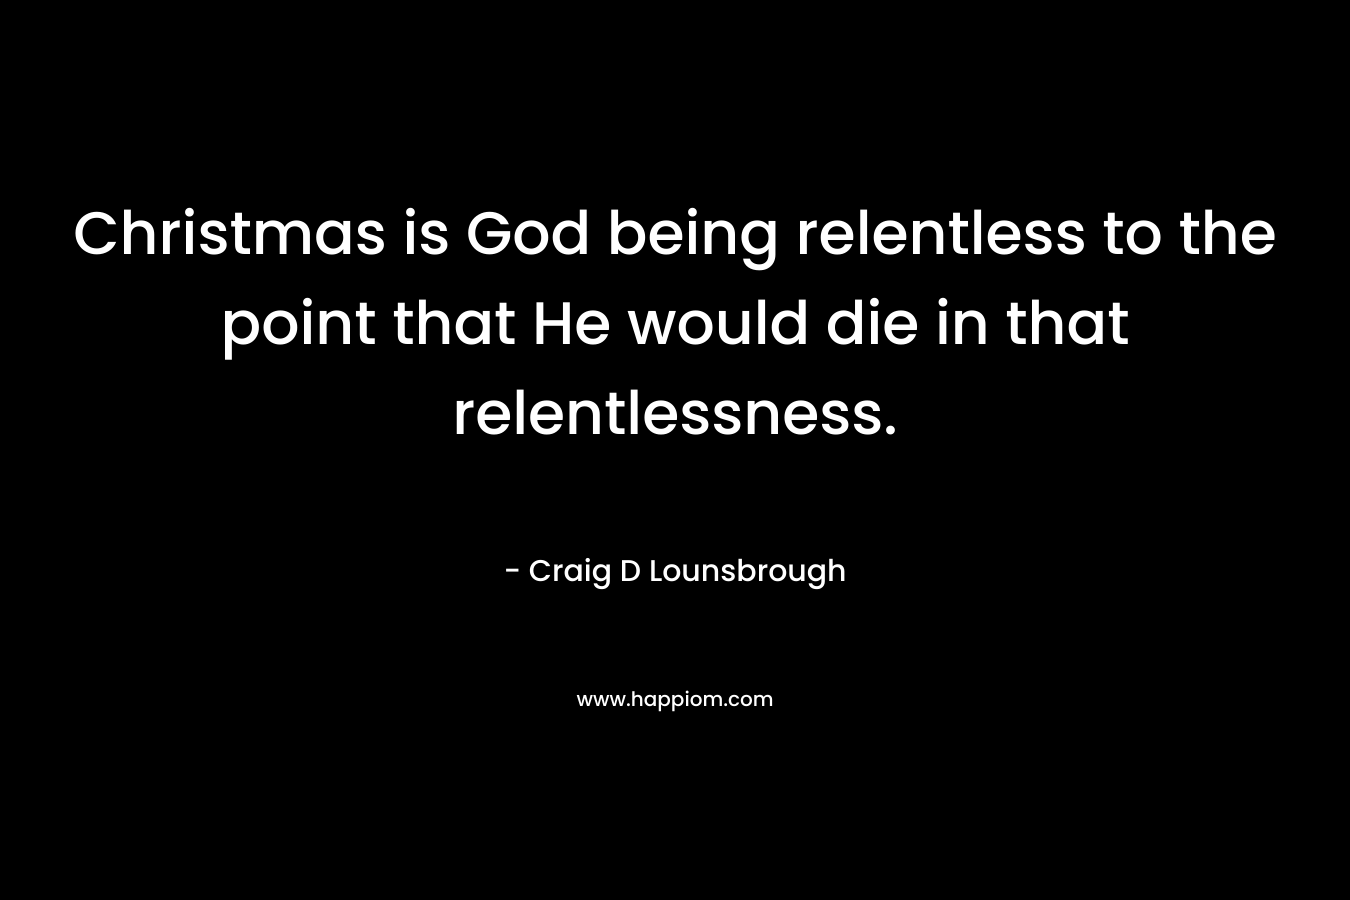 Christmas is God being relentless to the point that He would die in that relentlessness. – Craig D Lounsbrough